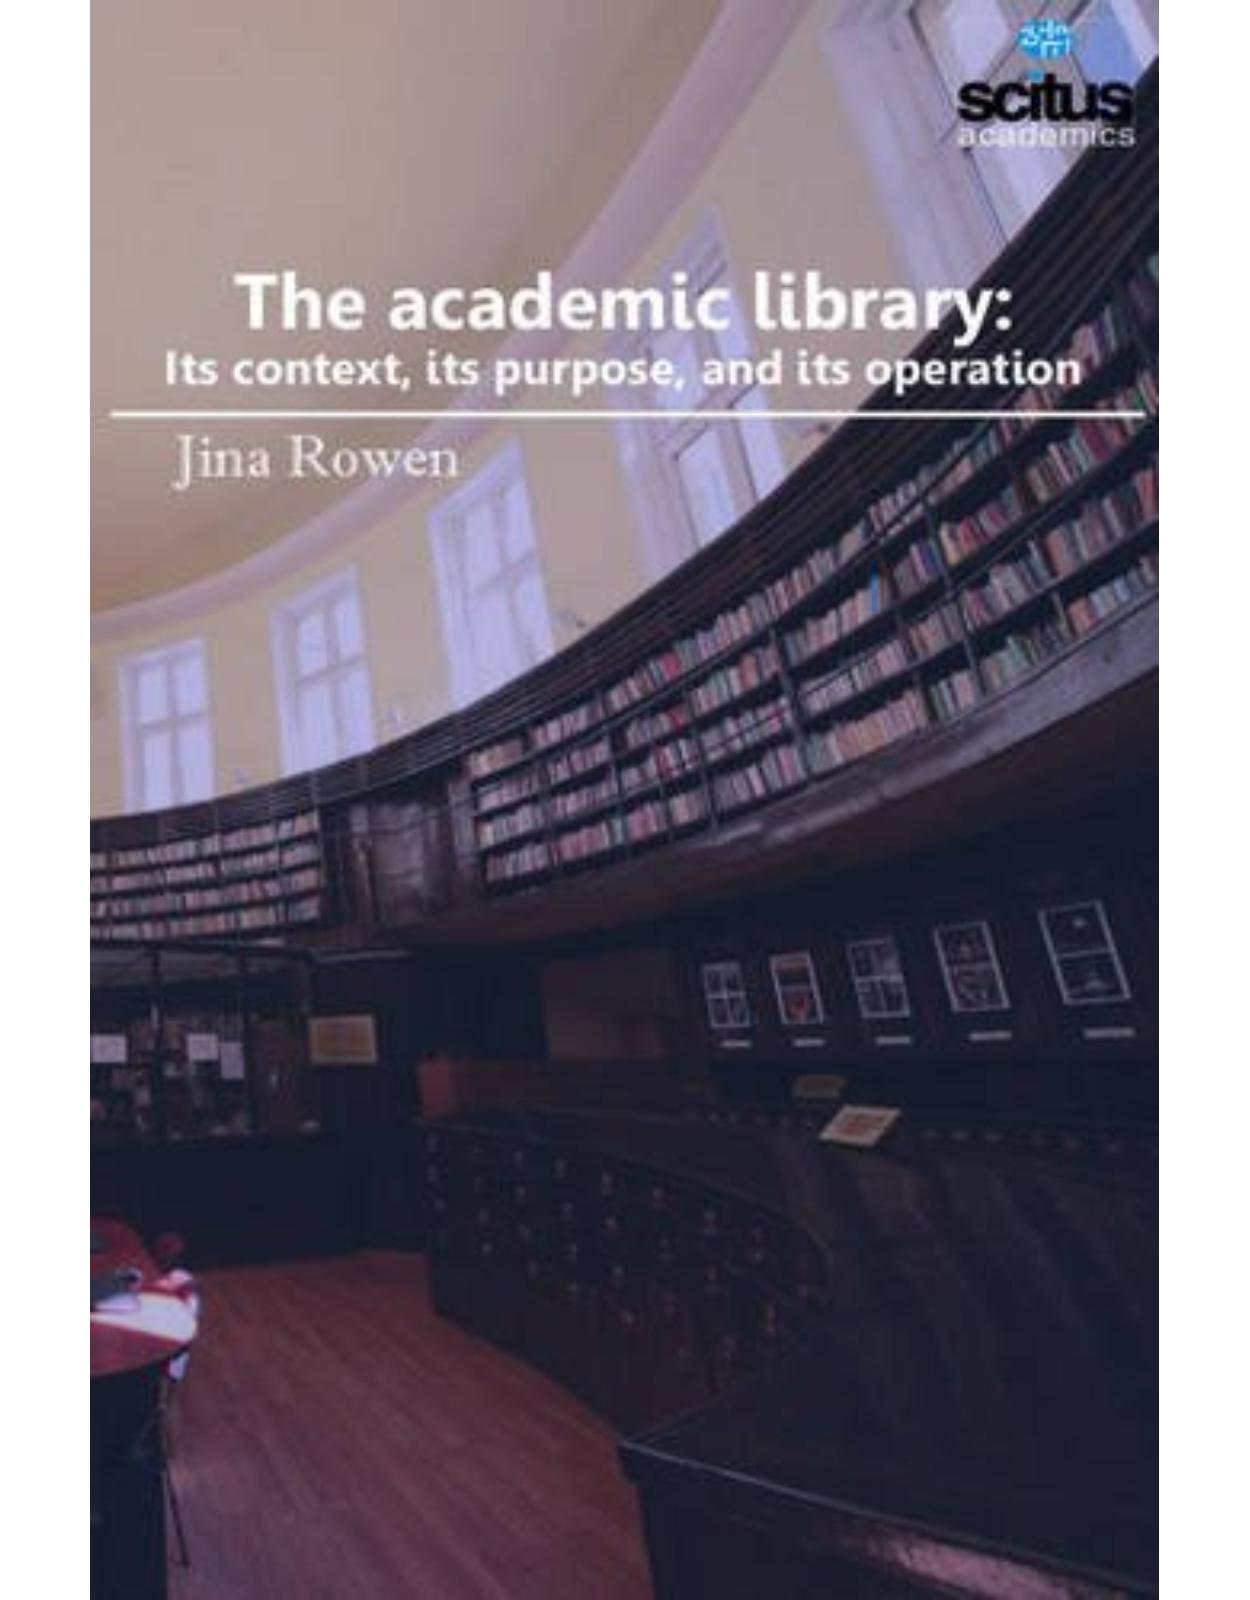 The Academic Library: Its Context, its Purpose, and its Operation